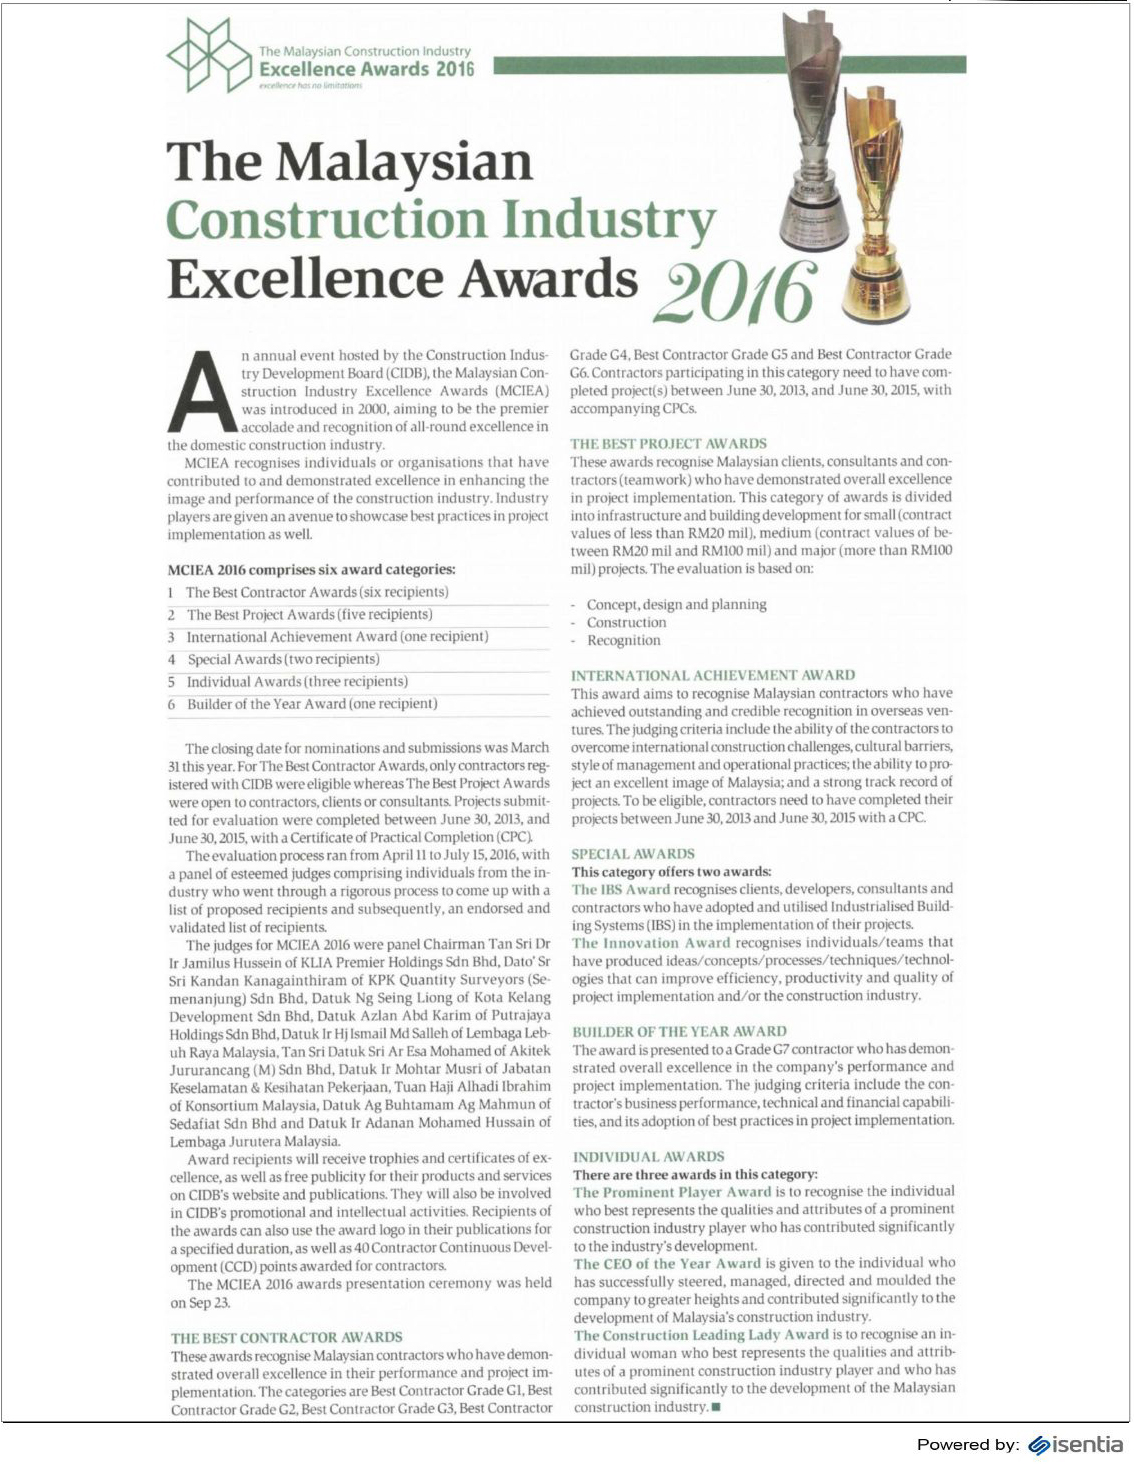 The Malaysian Construction Industry Excellence Awards 2016